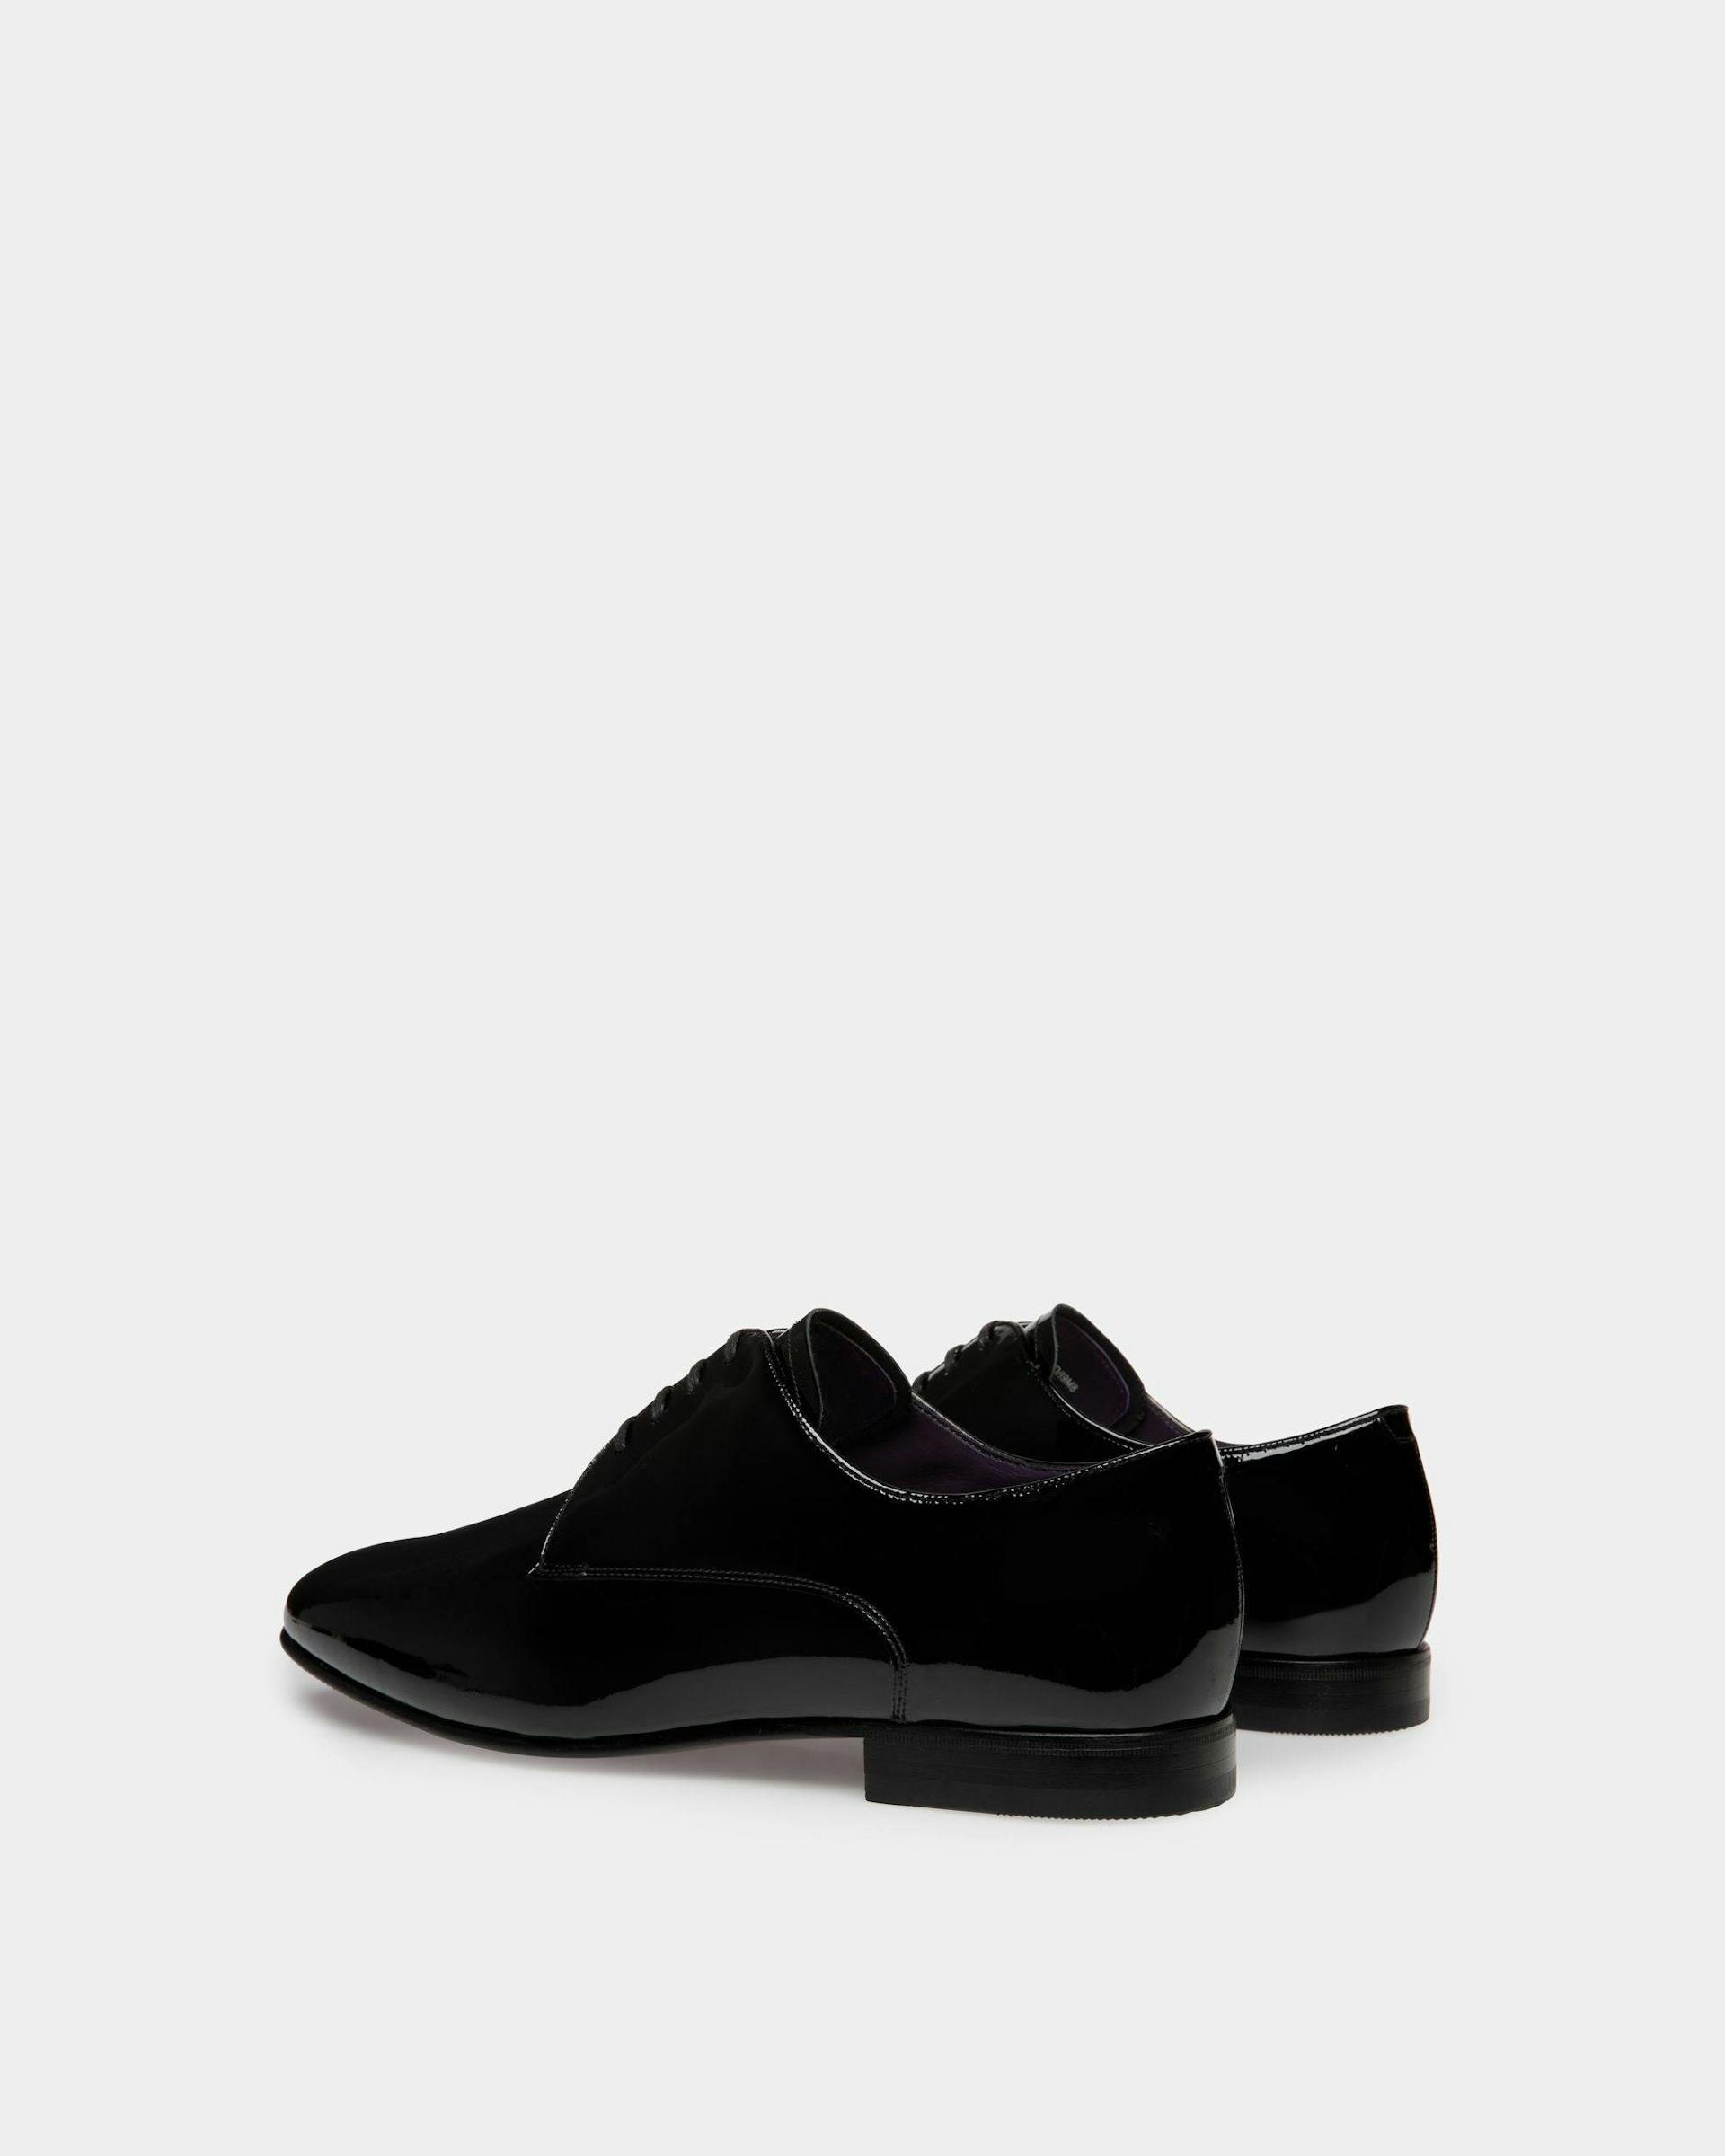 Men's Suisse Derby in Black Patent Leather | Bally | Still Life 3/4 Back